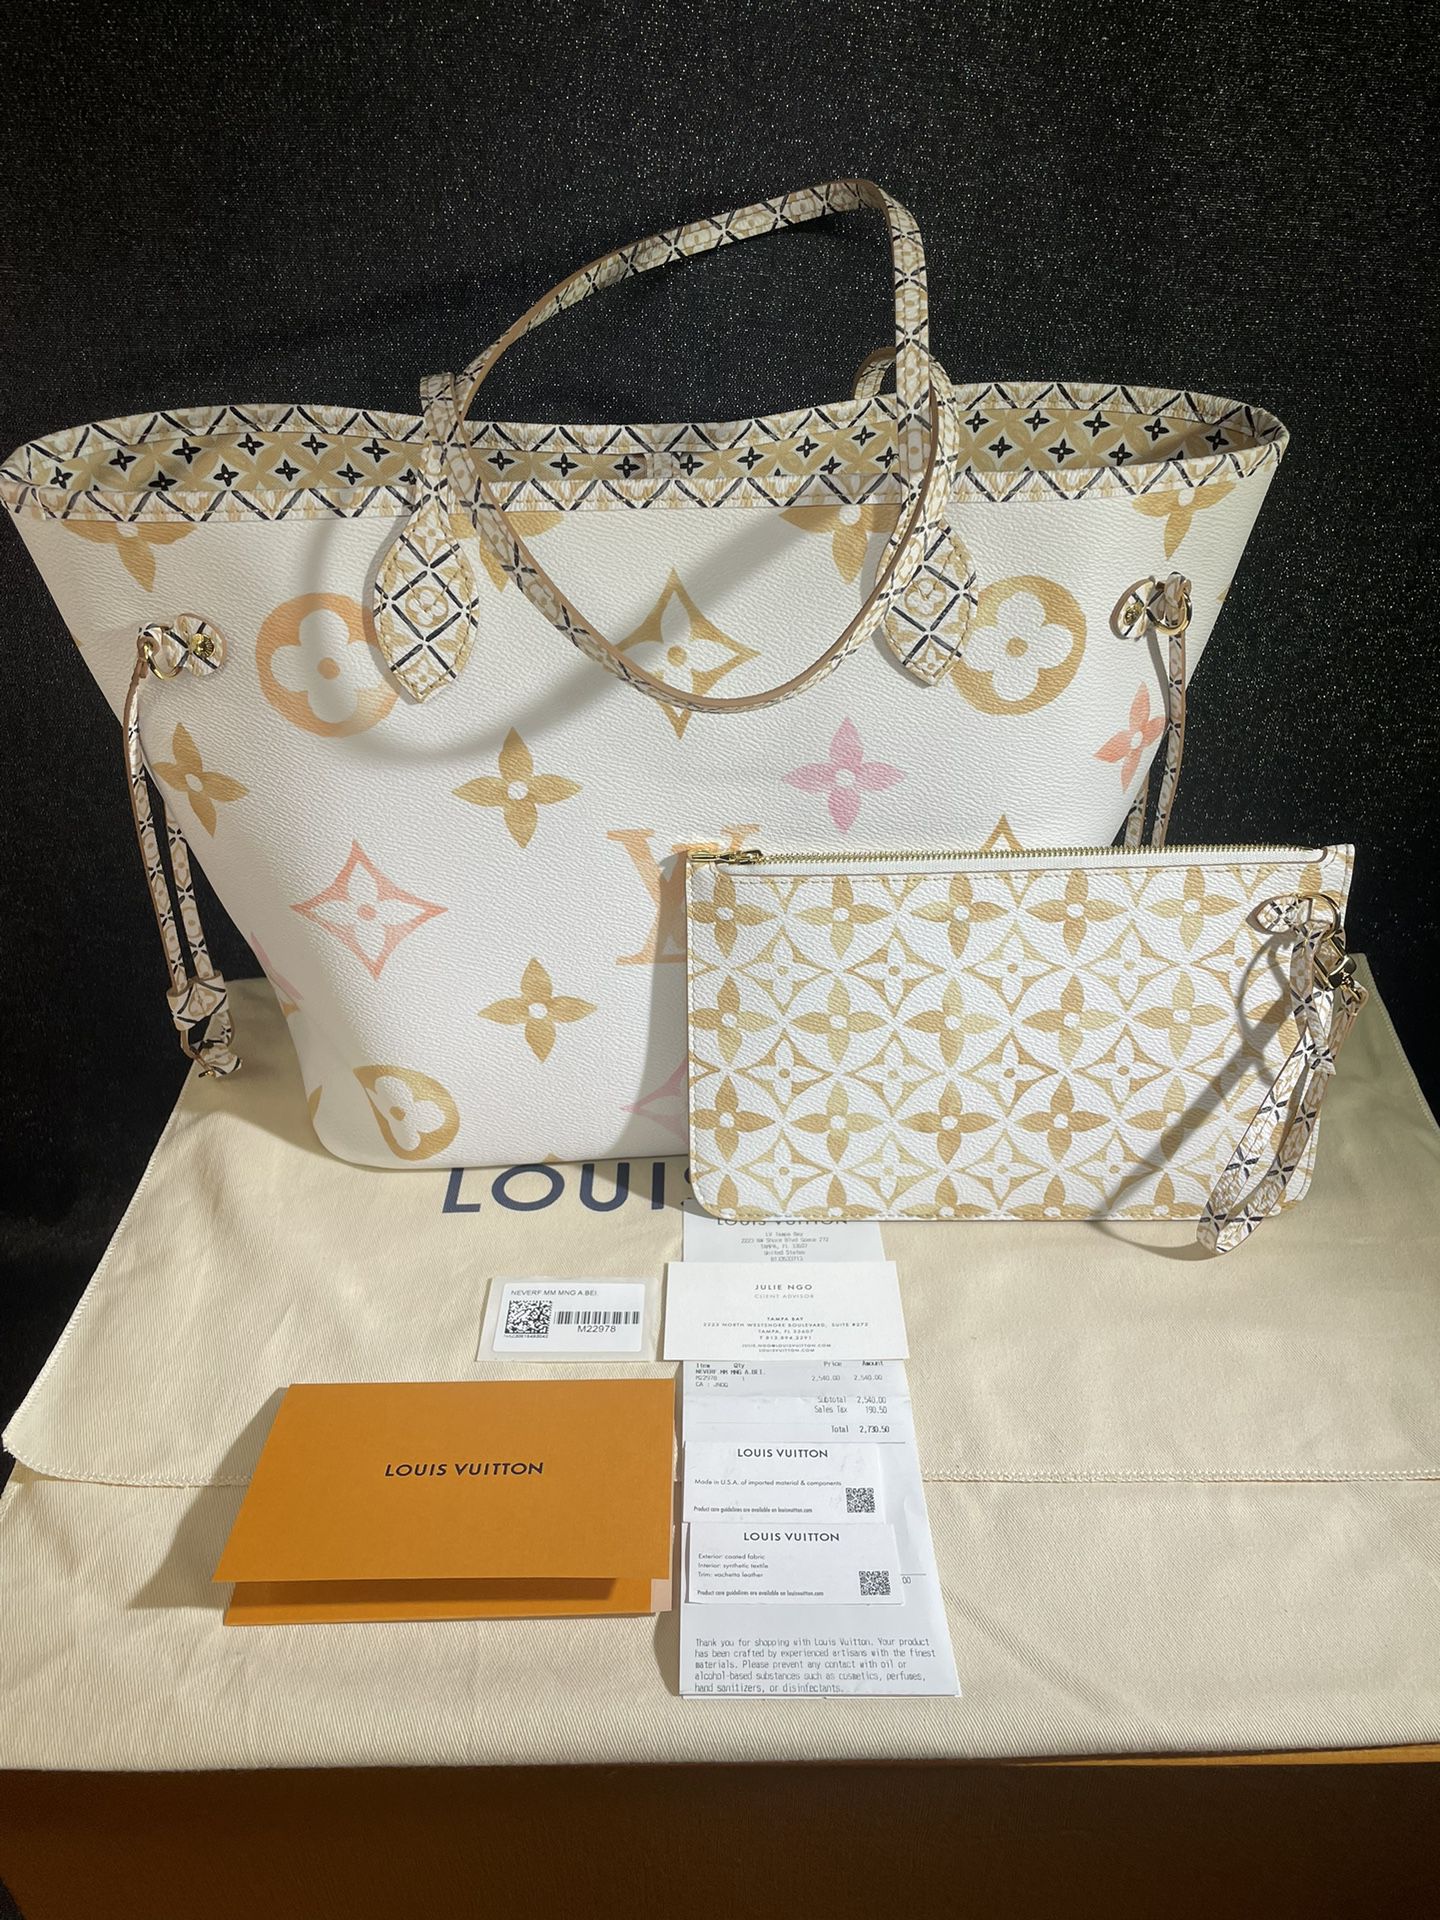 LOUIS VUITTON Neverfull MM Tote Bag BY THE POOL Beige White M22978 